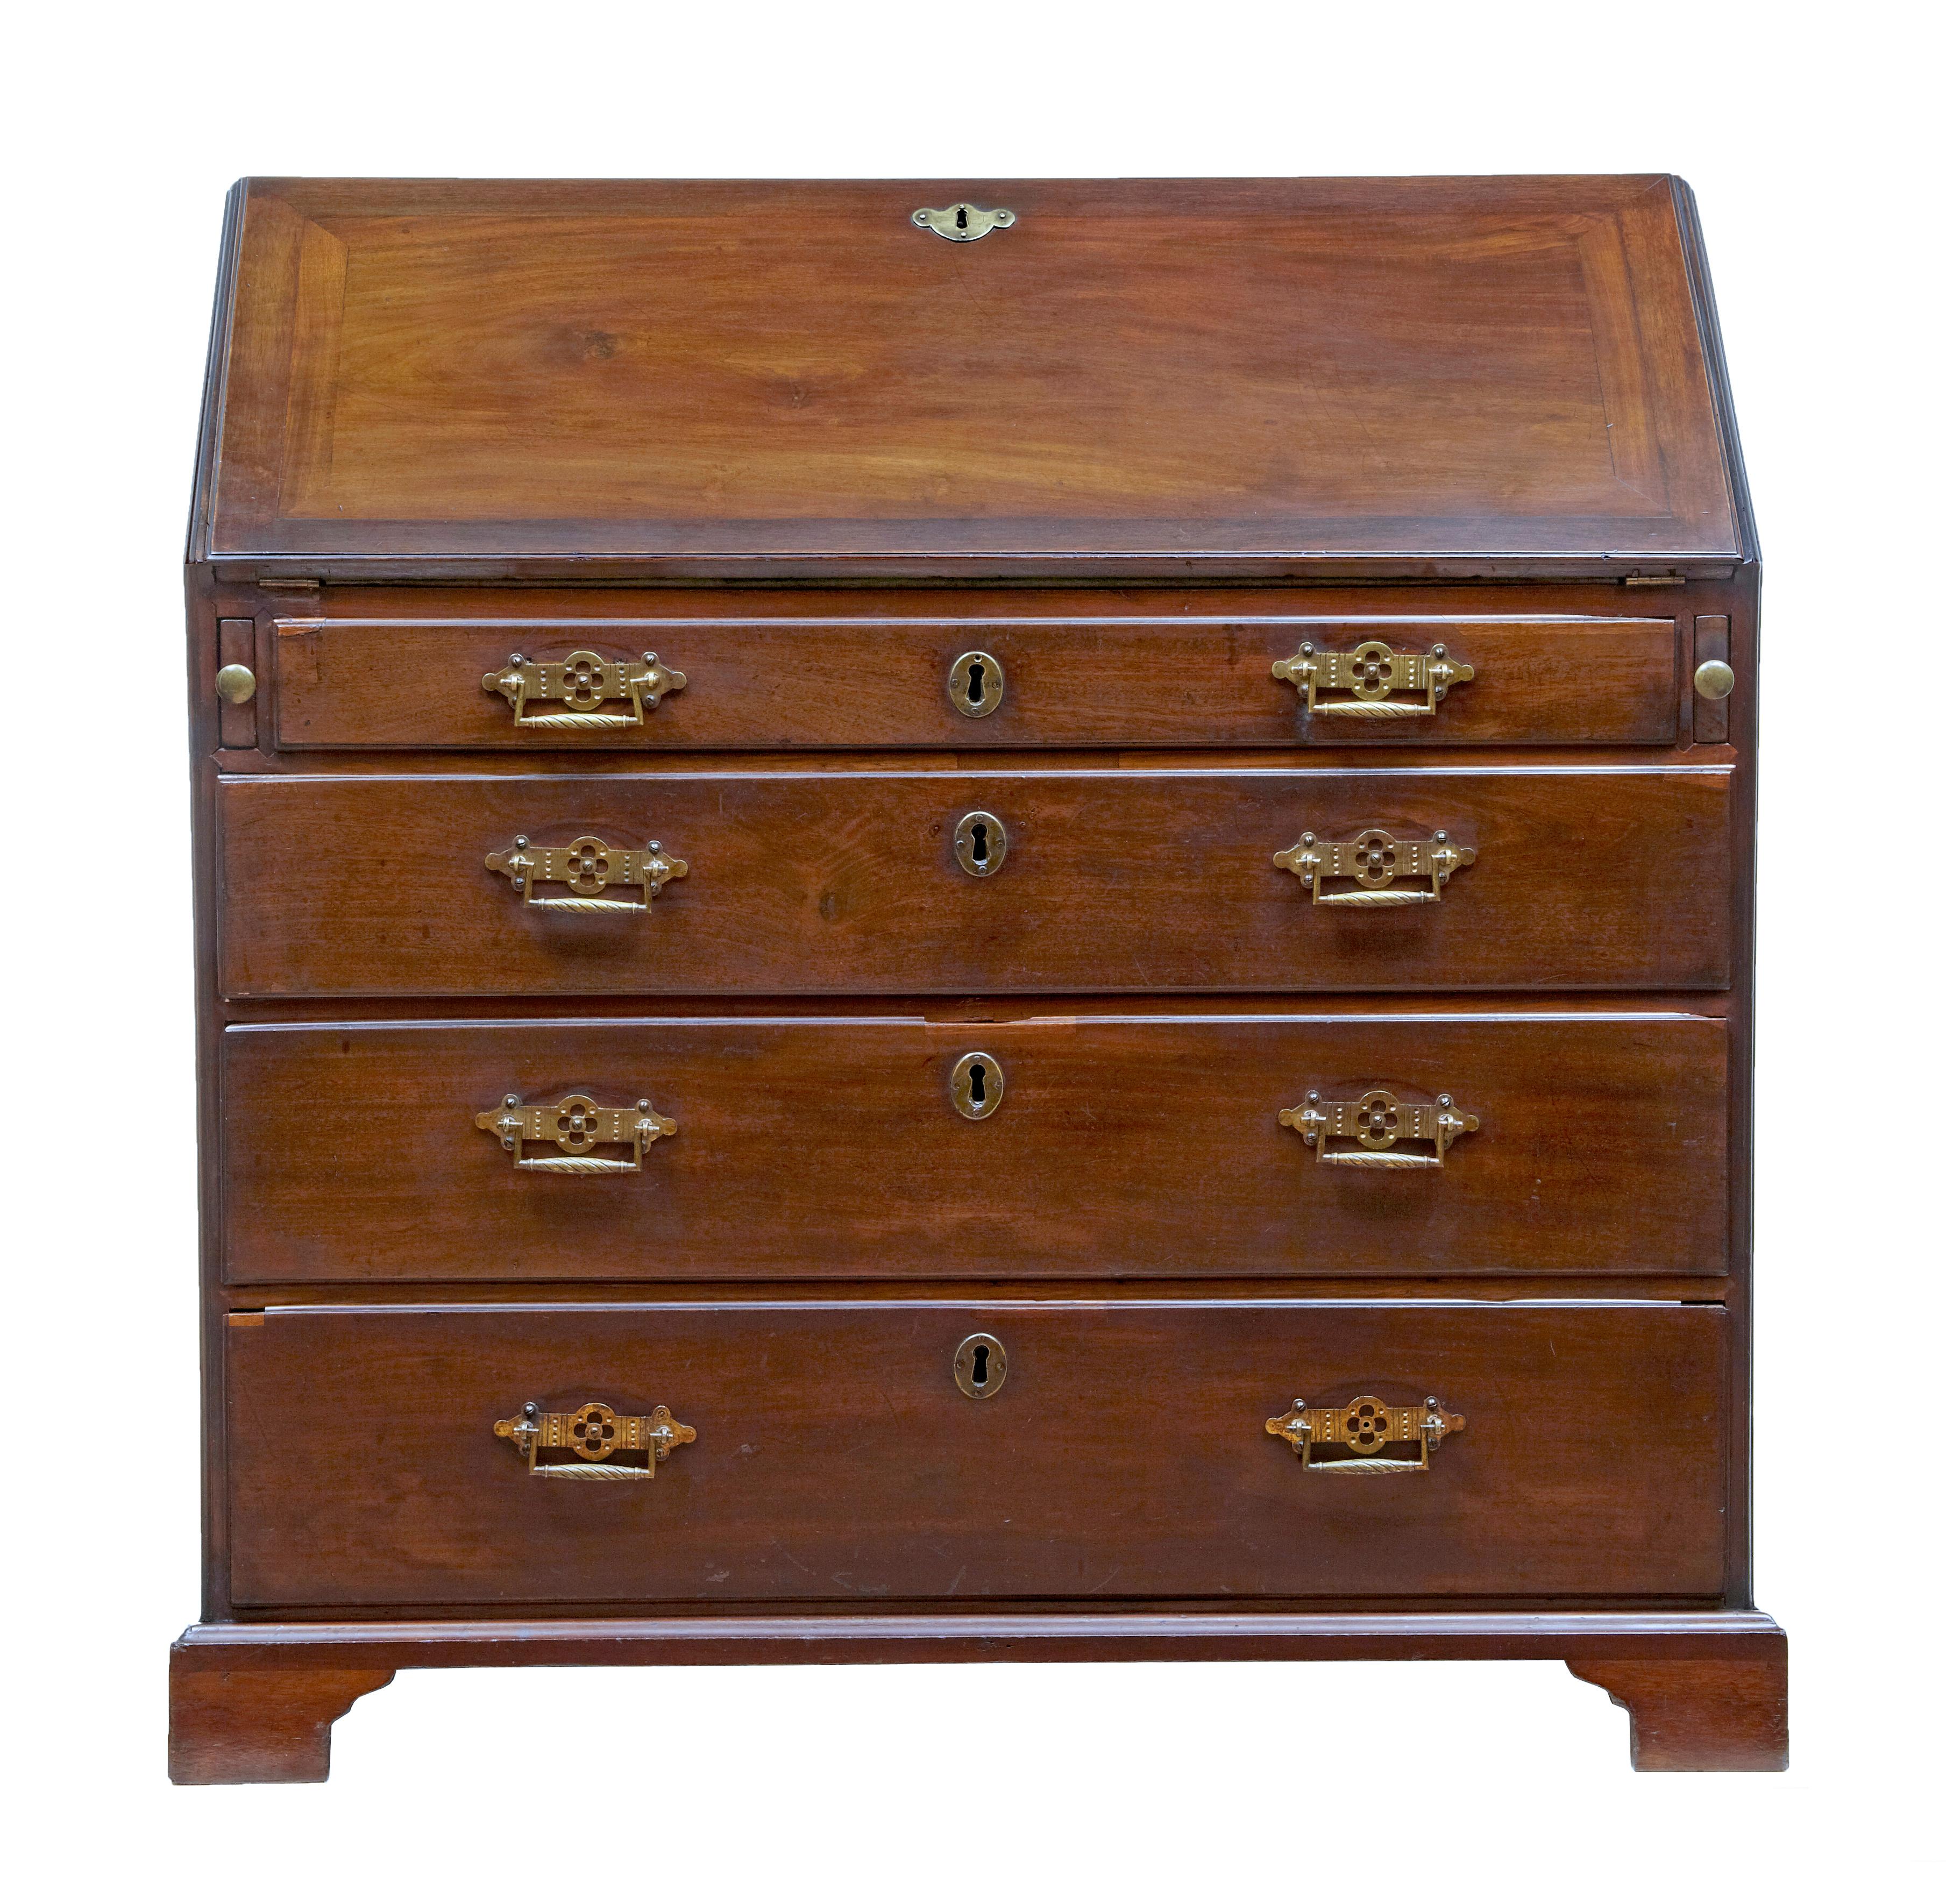 Late 18th century George III mahogany bureau desk, circa 1790.

Fine mahogany bureau from the late Georgian period. Crossbanded fall drops down onto supports to form the writing surface. Interior is fully fitted with pigeon holes and drawers